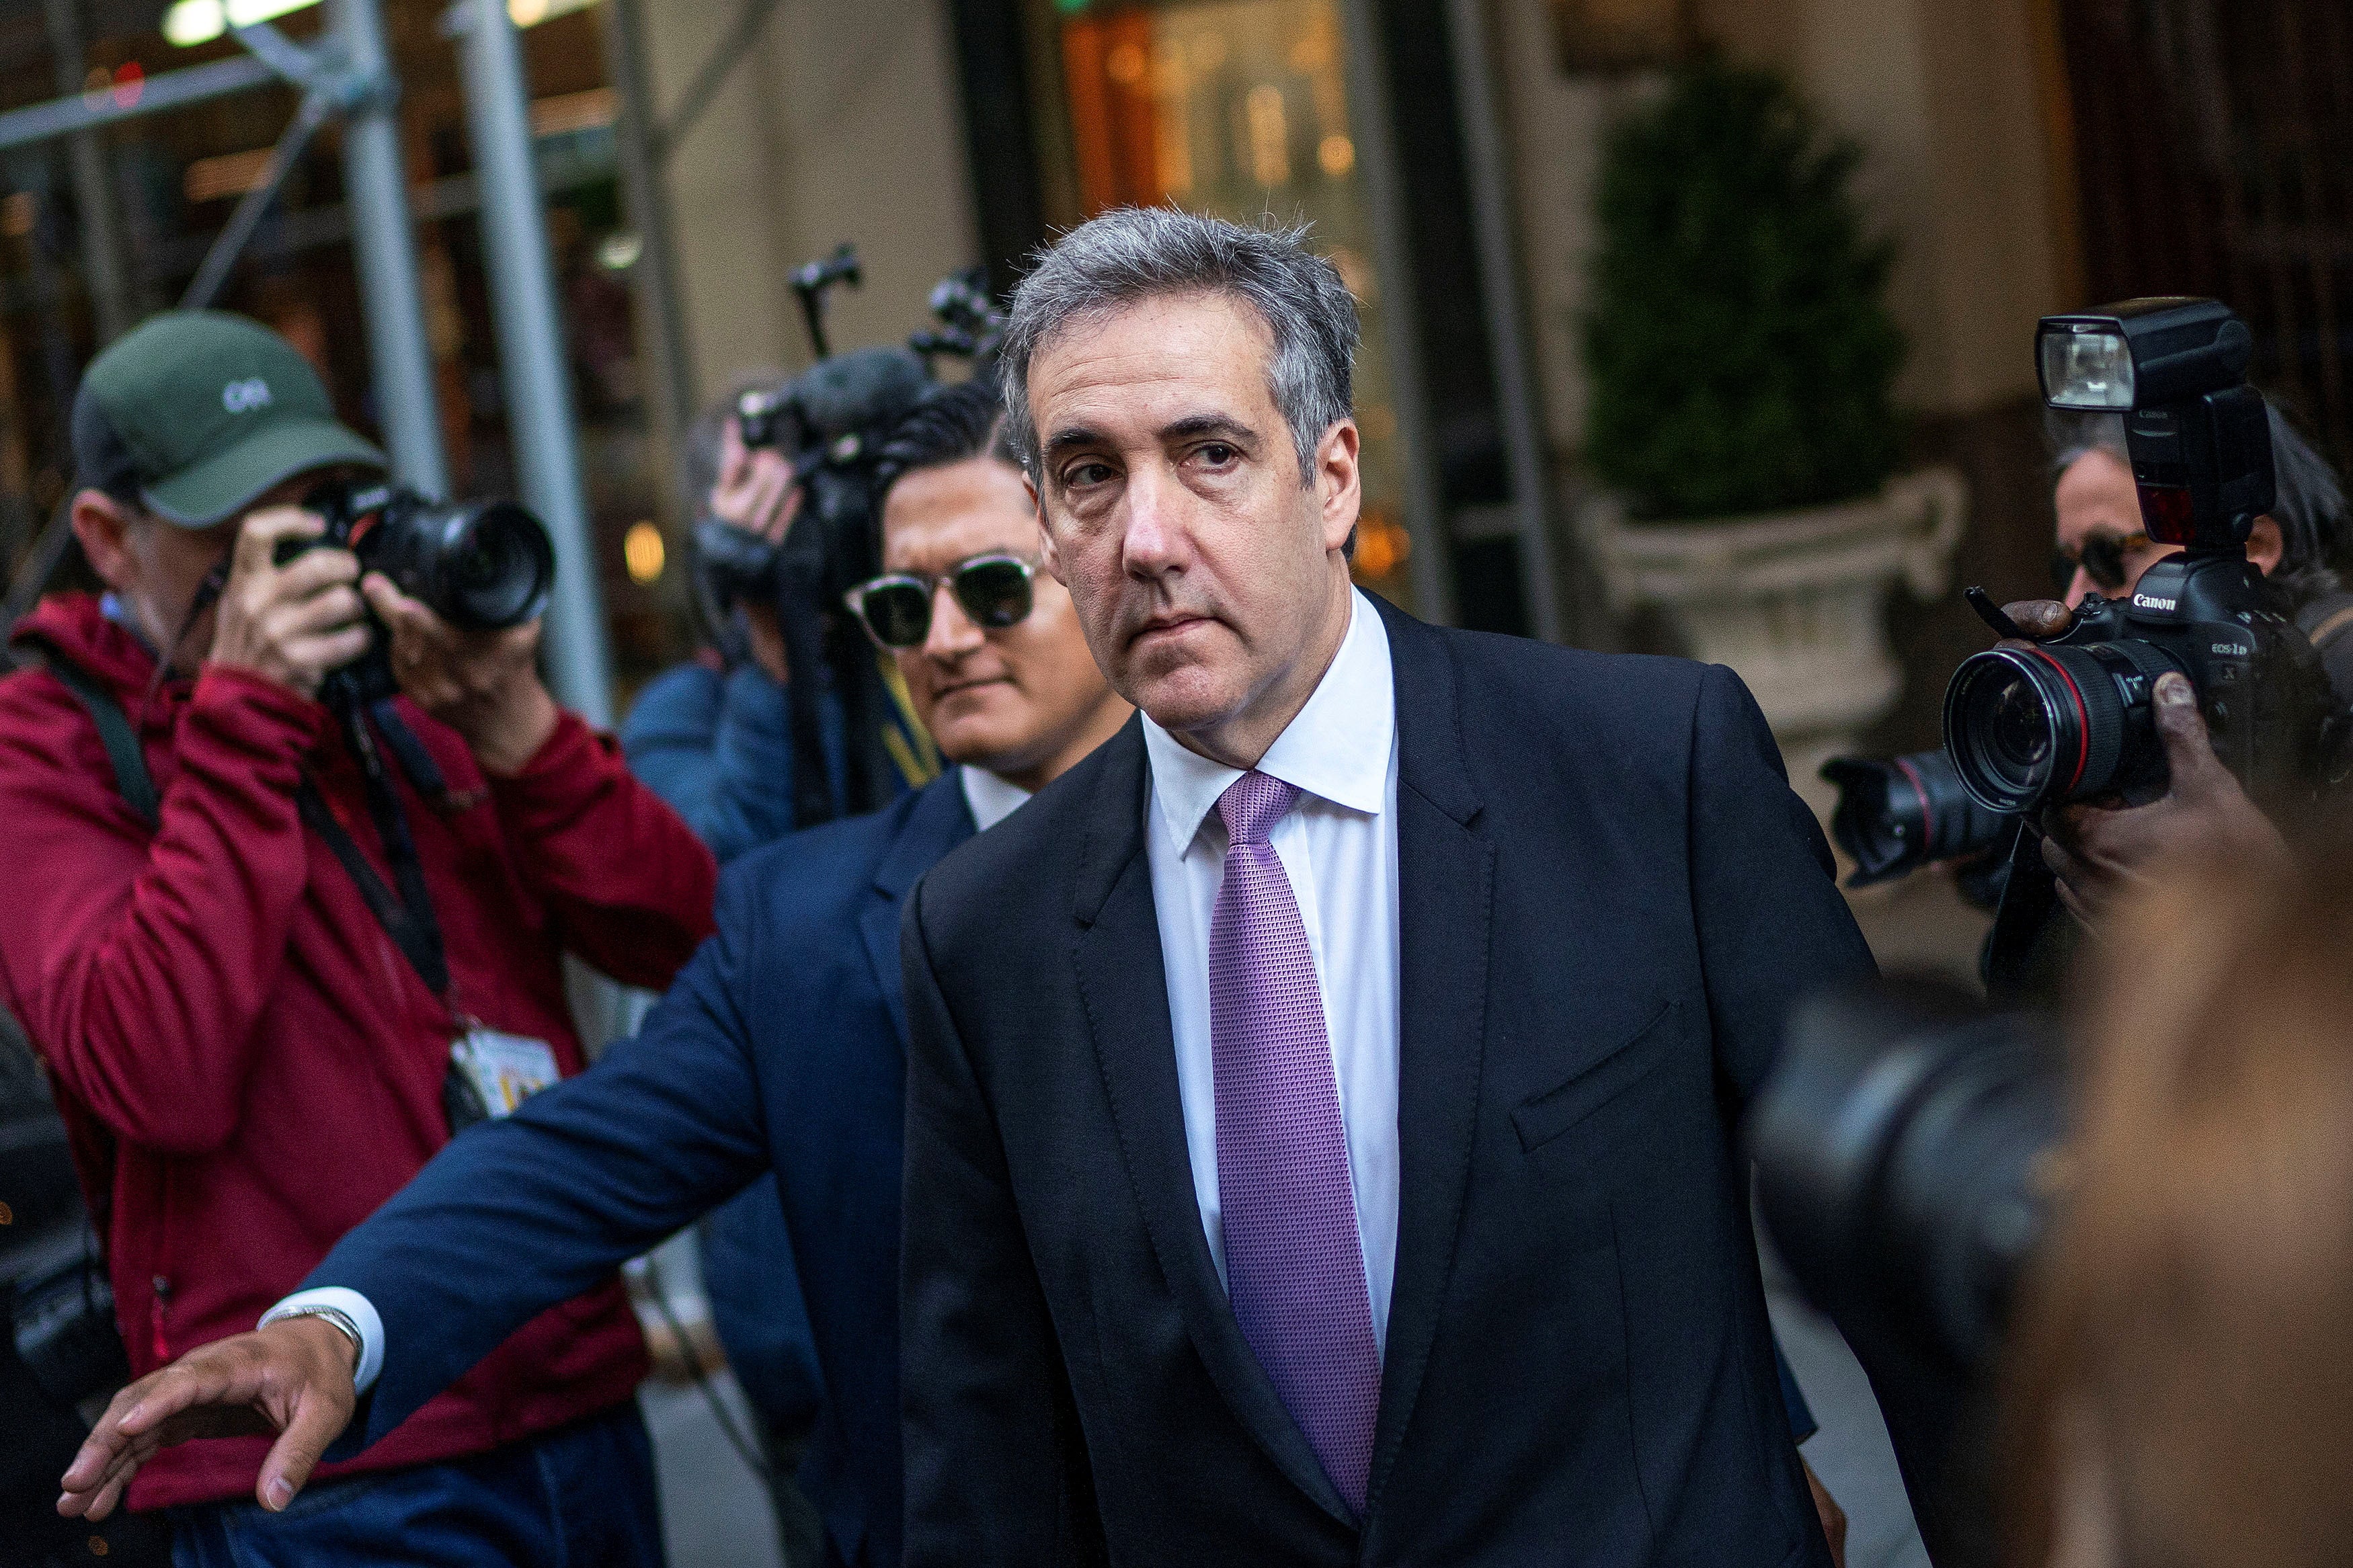 Michael Cohen leaves his apartment building in Manhattan to testify in Donald Trump’s hush money trial on May 20.